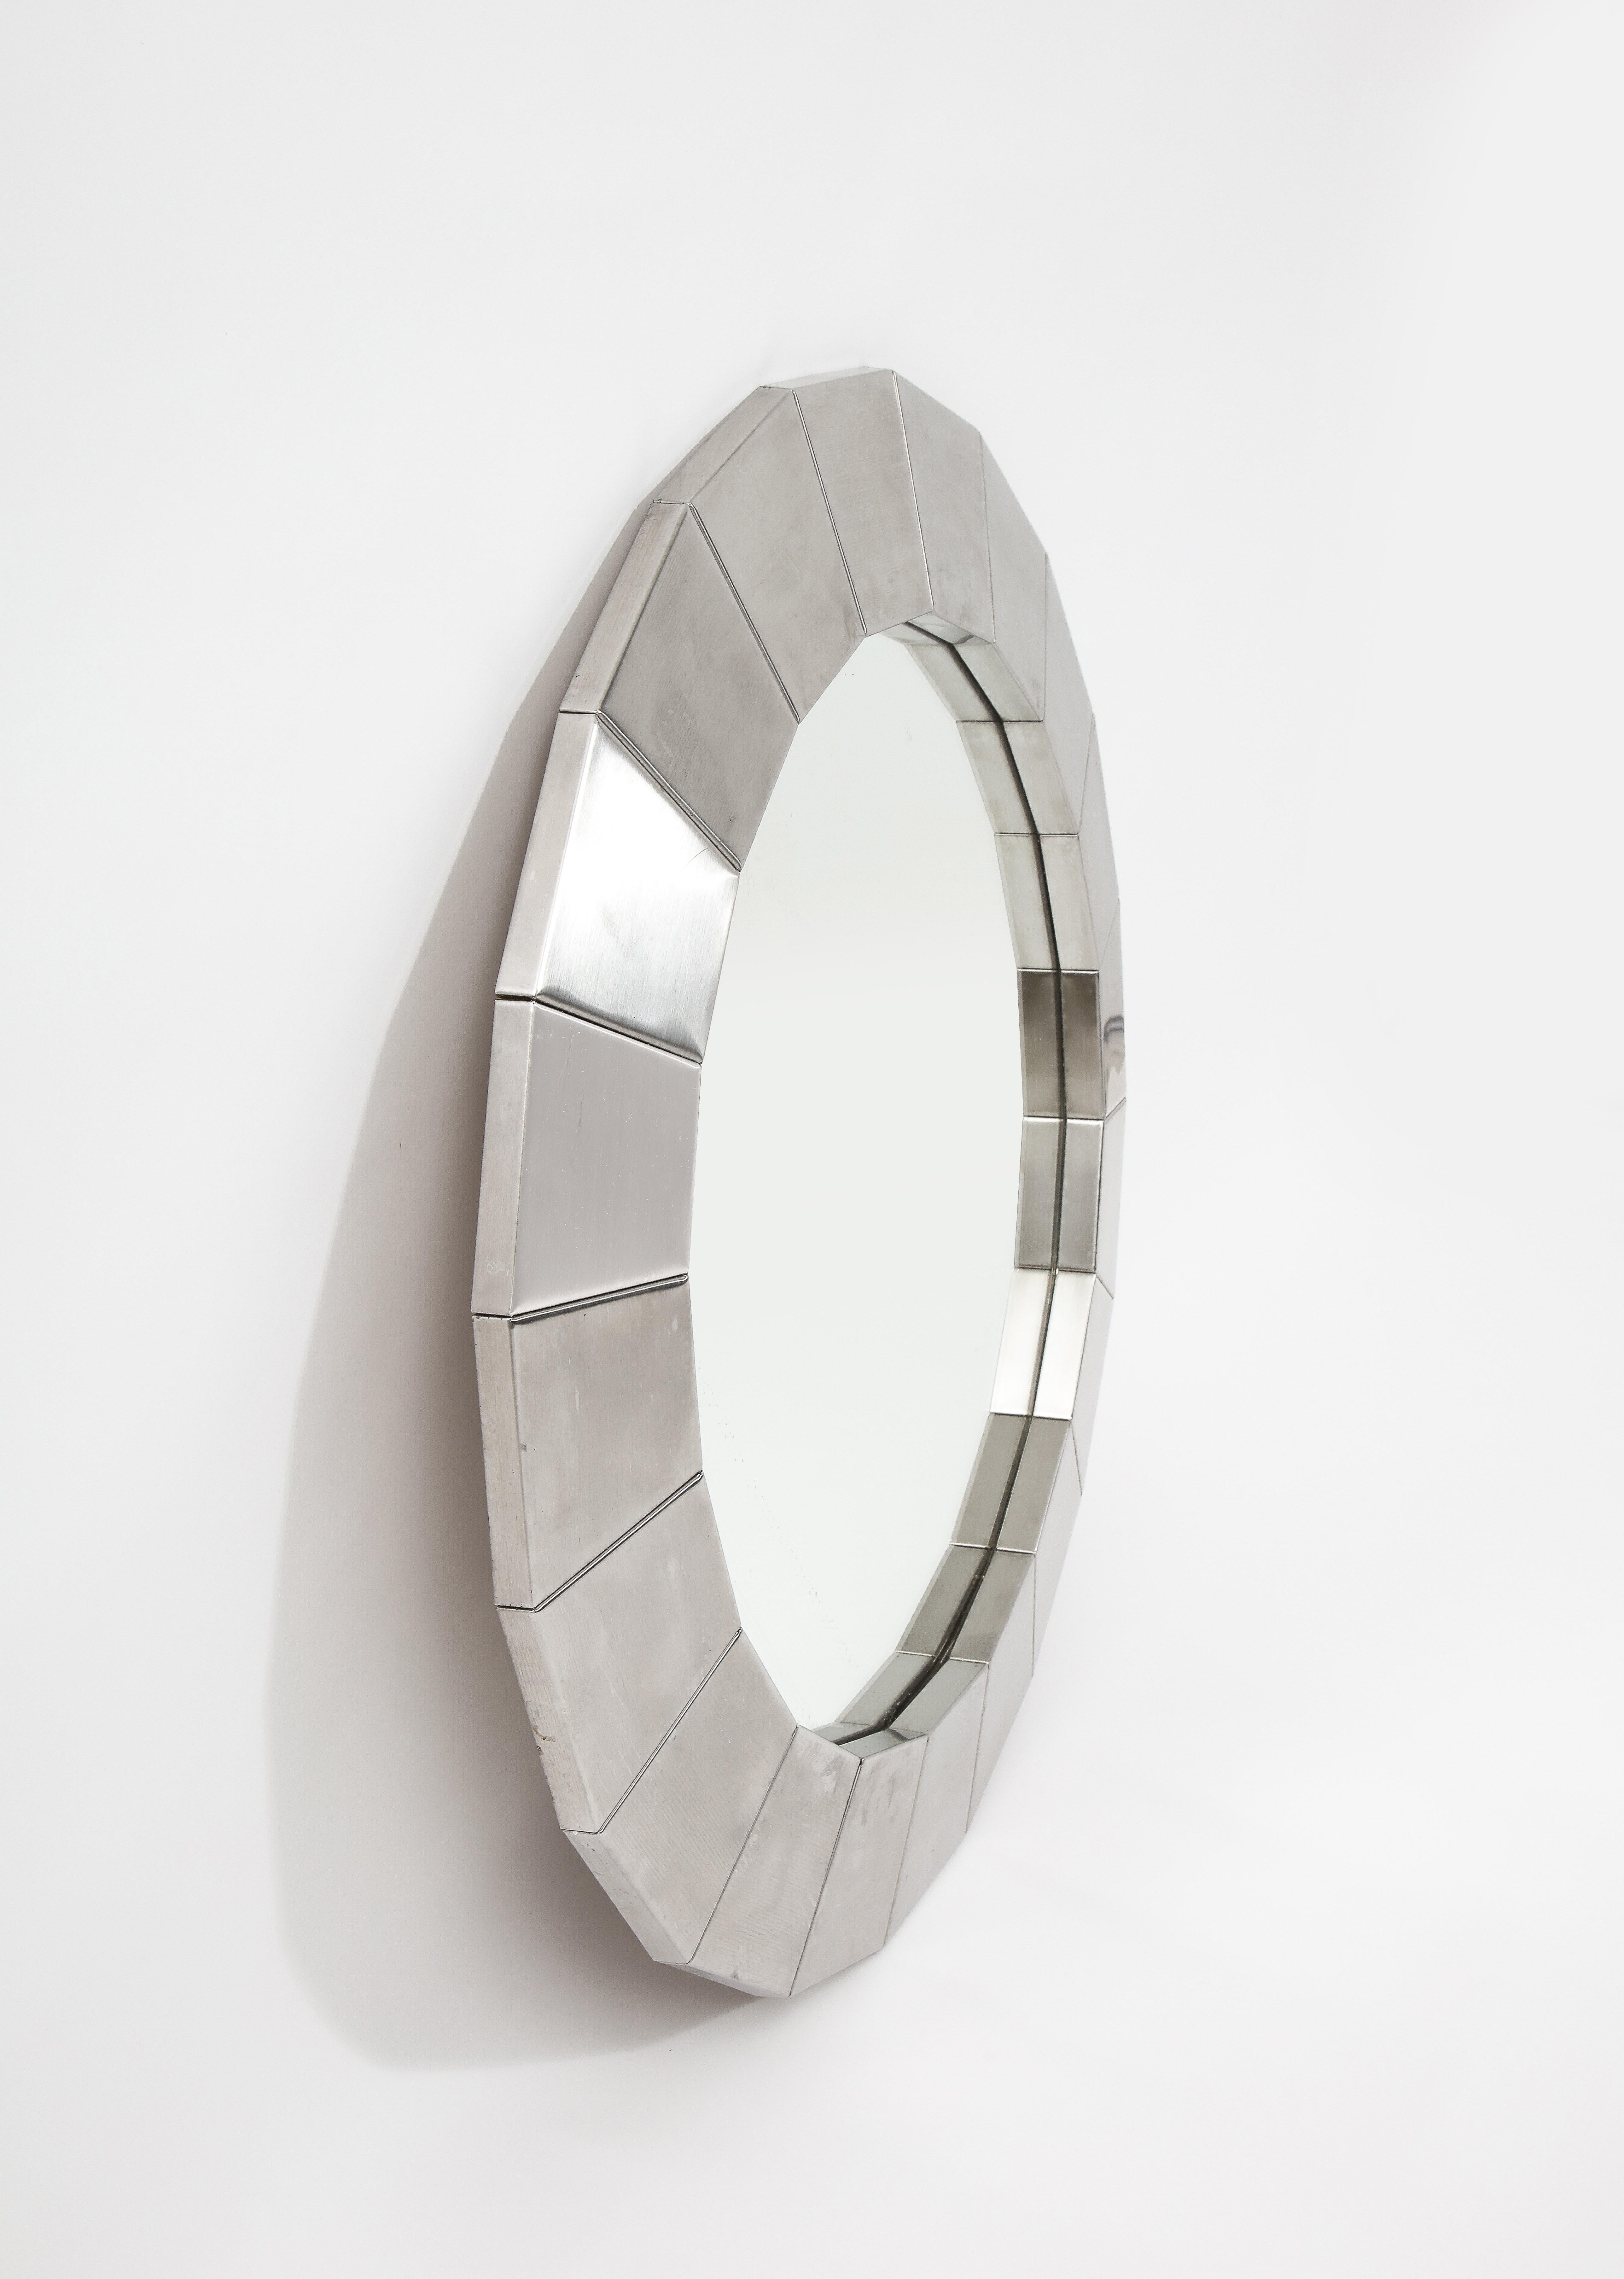 Faceted Stainless Steel Round Mirror, France 1970's 1